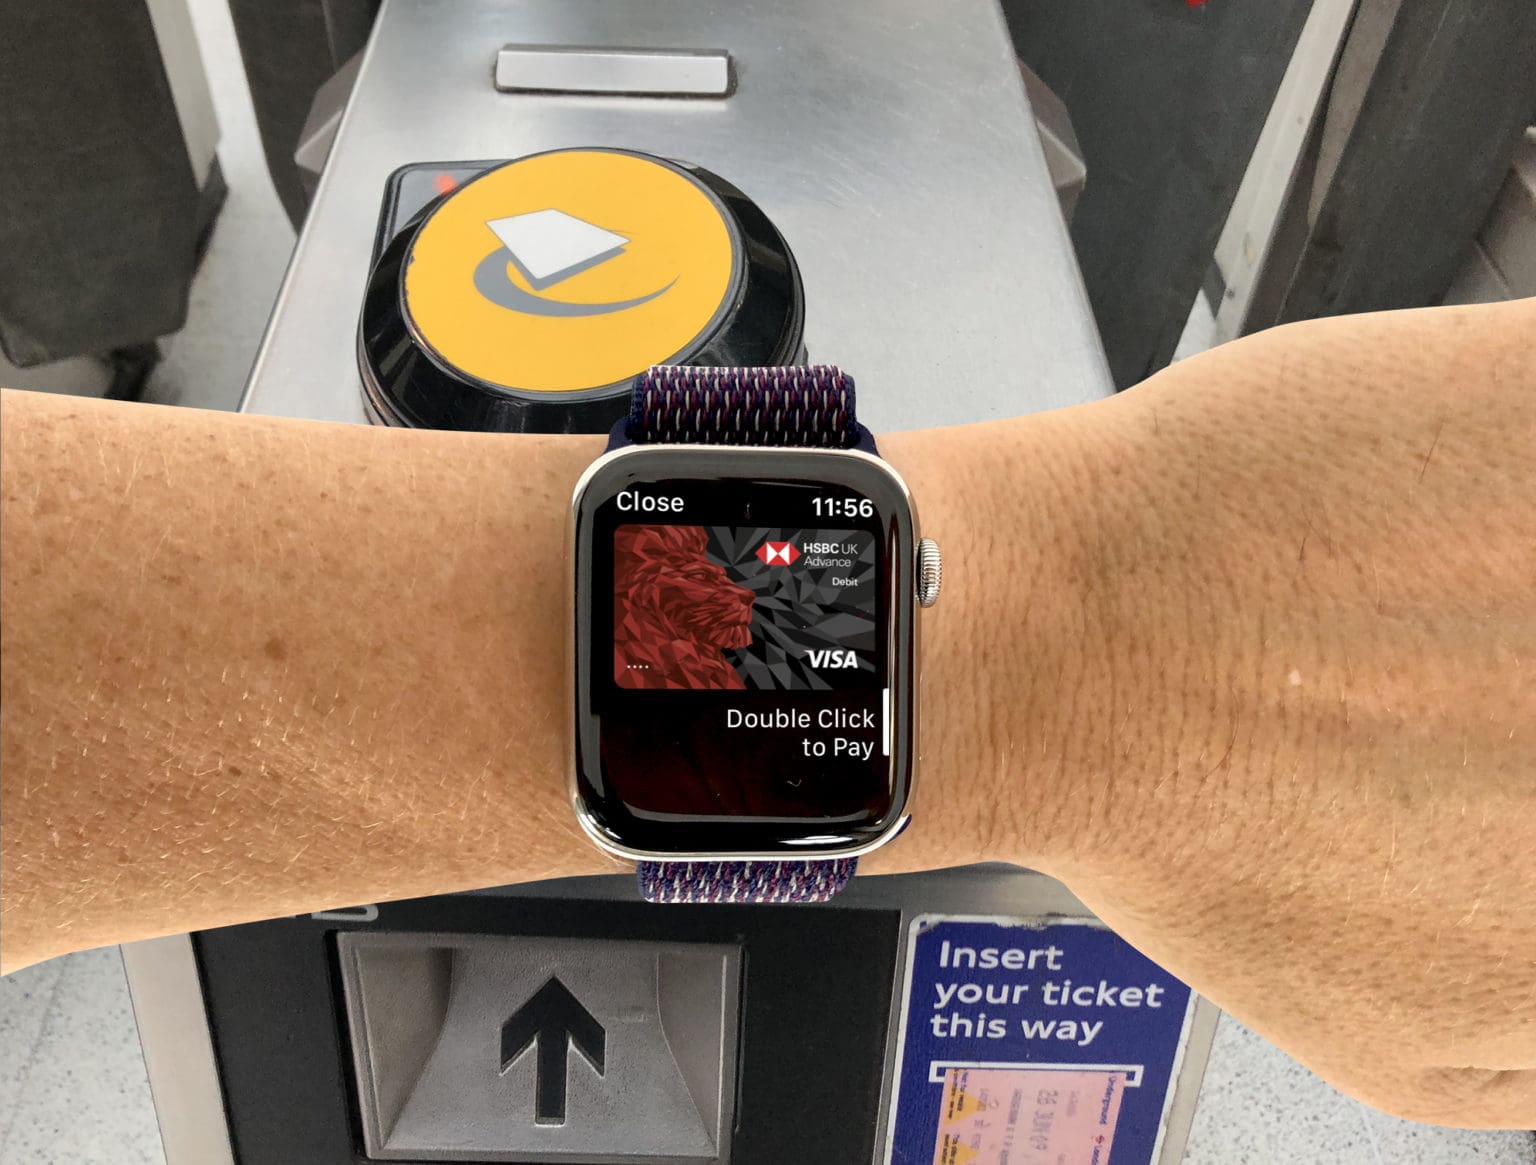 You don't need to trigger Apple Pay to access the London Underground